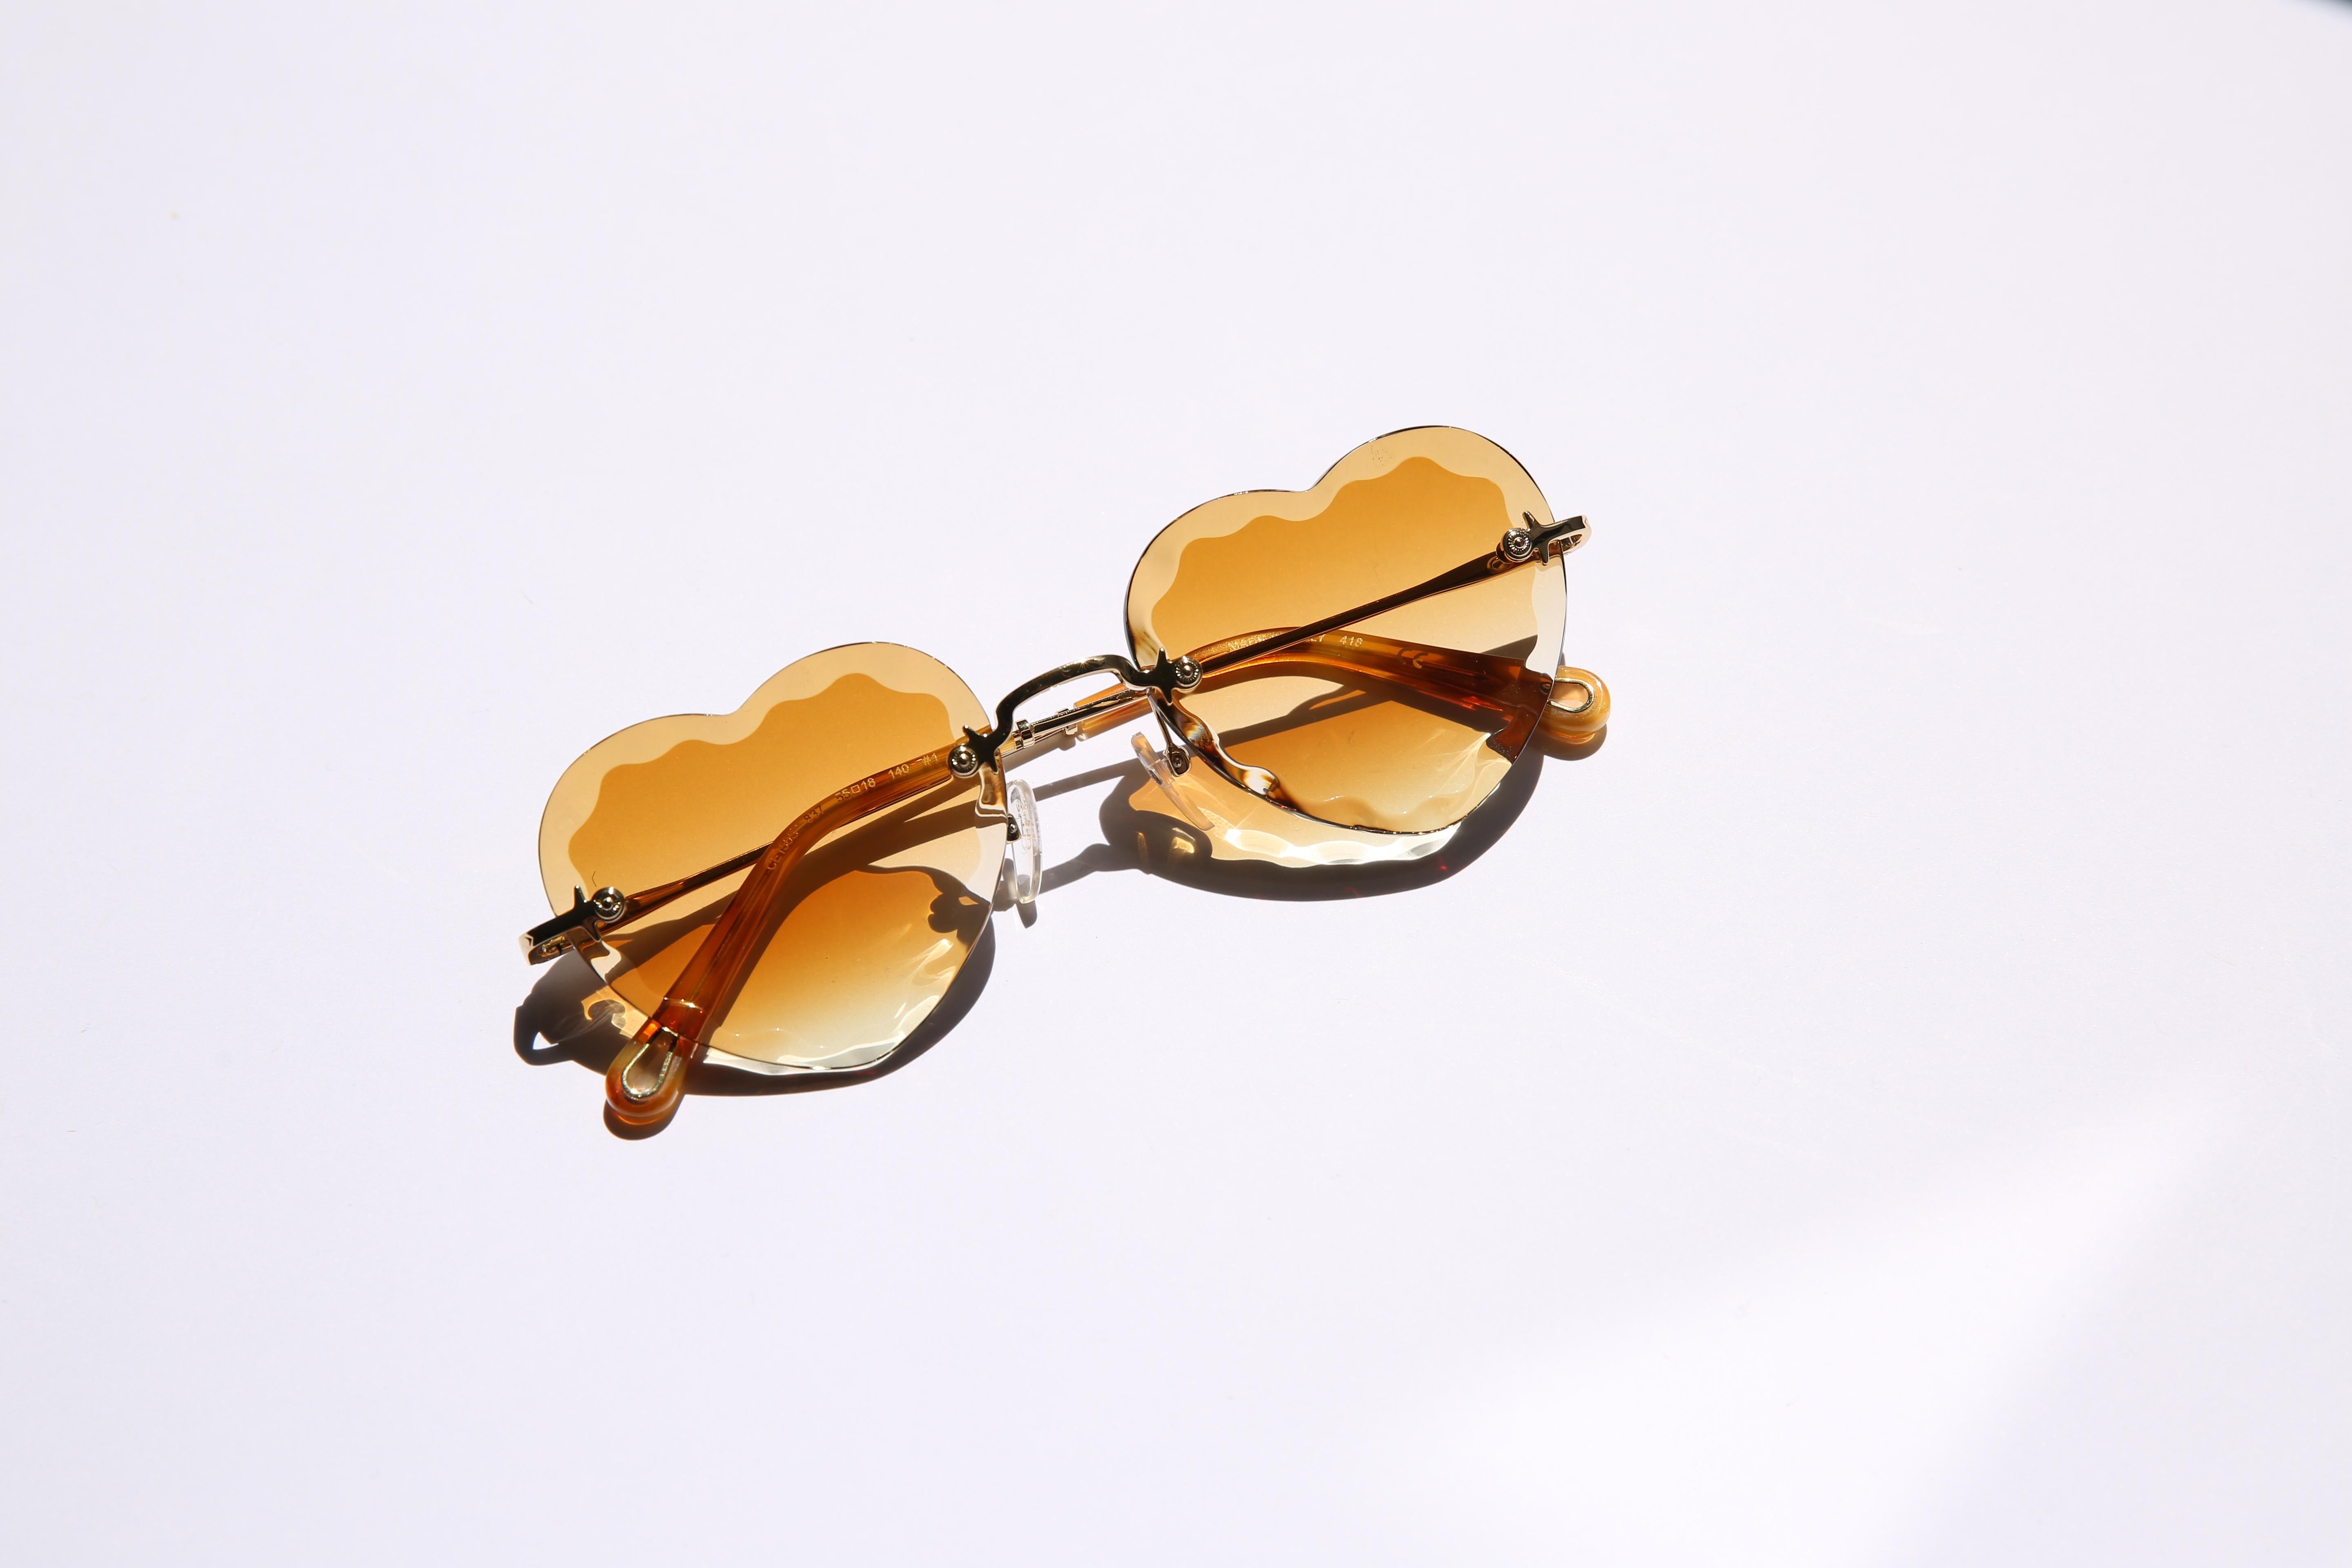 Chloe heart shaped Rosie sunglasses in brown with gold hardware

Unique and feminine with a hint of mischief, the Rosie line is reimagined in a playful heart shape. Distinctive thick bevelled lenses create a strong yet light silhouette in these